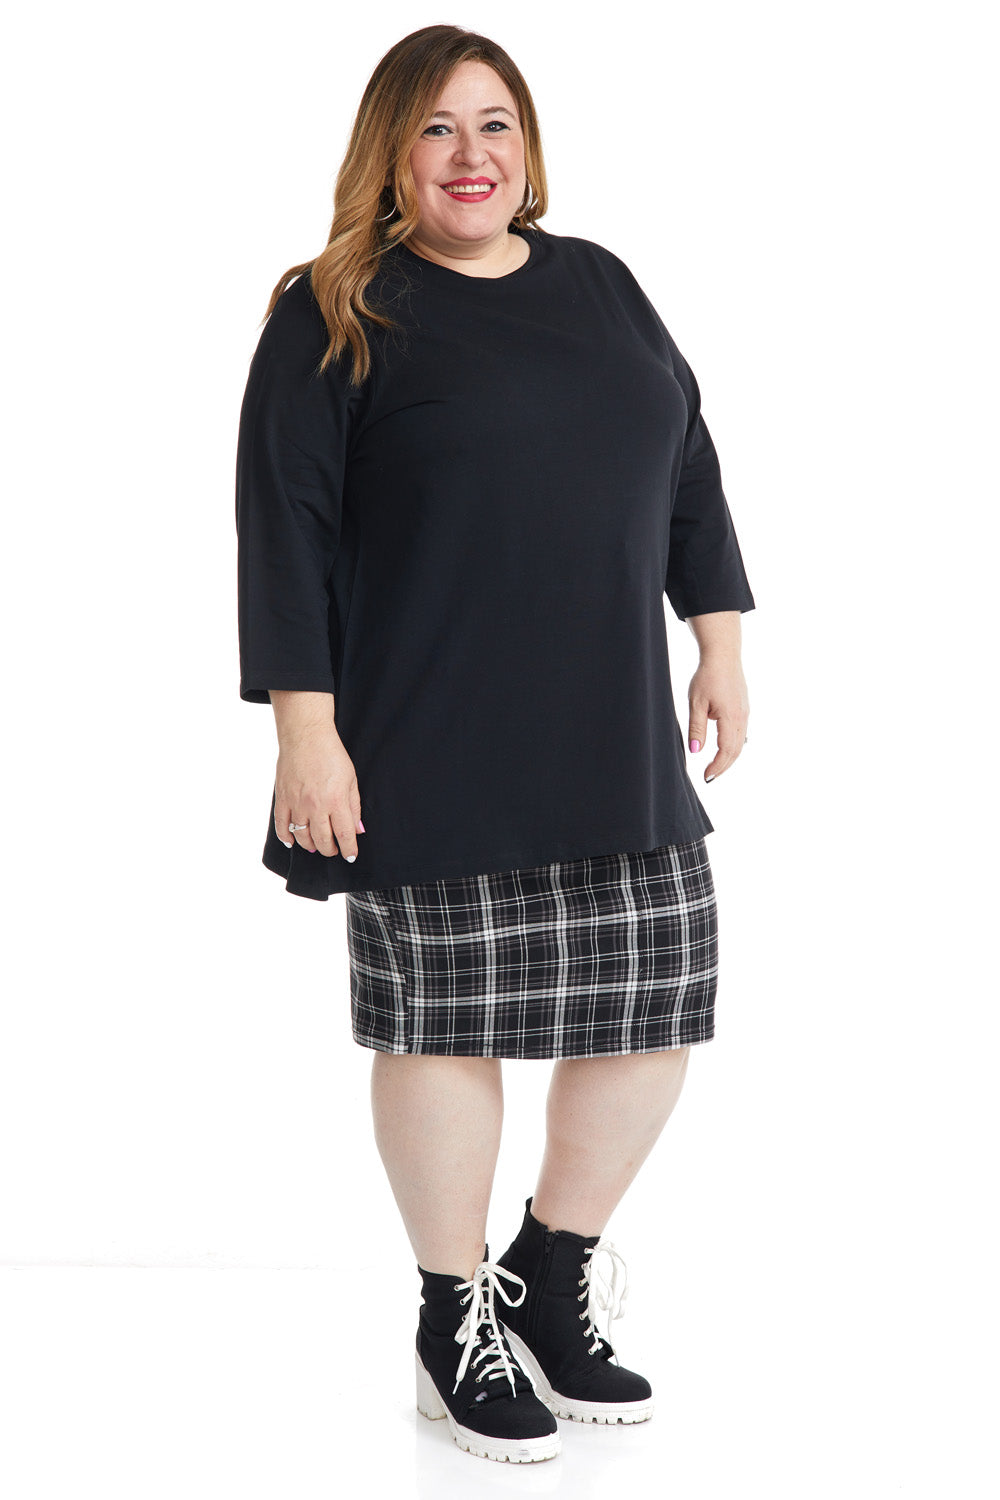 Casual plus size Black 3/4 sleeve baggy t-shirt for women